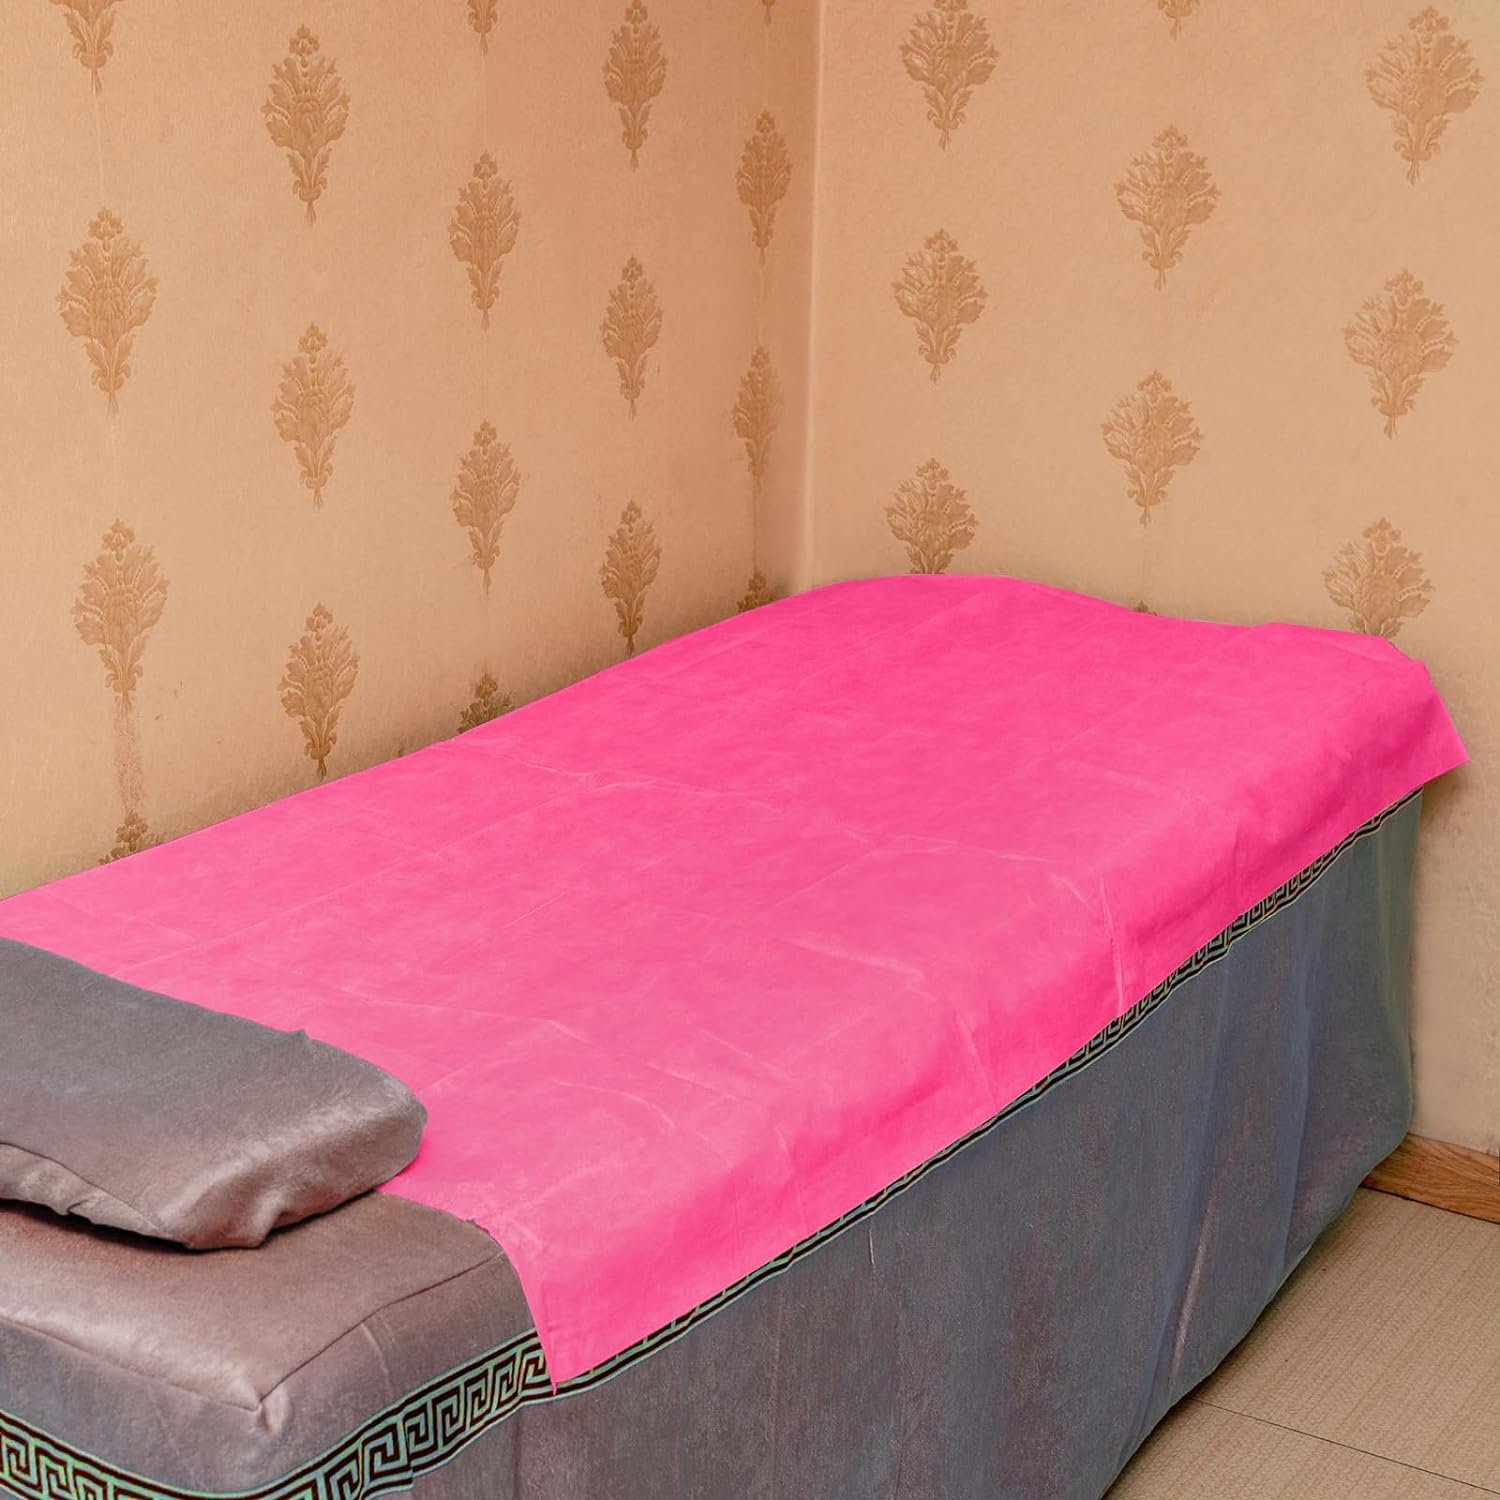 DEAYOU 40 PCS Spa Bed Sheets, Non Woven Fabric Bed Cover for Tattoo, Hotel, Esthetician, 31 x 70, Oil-Proof, Pink